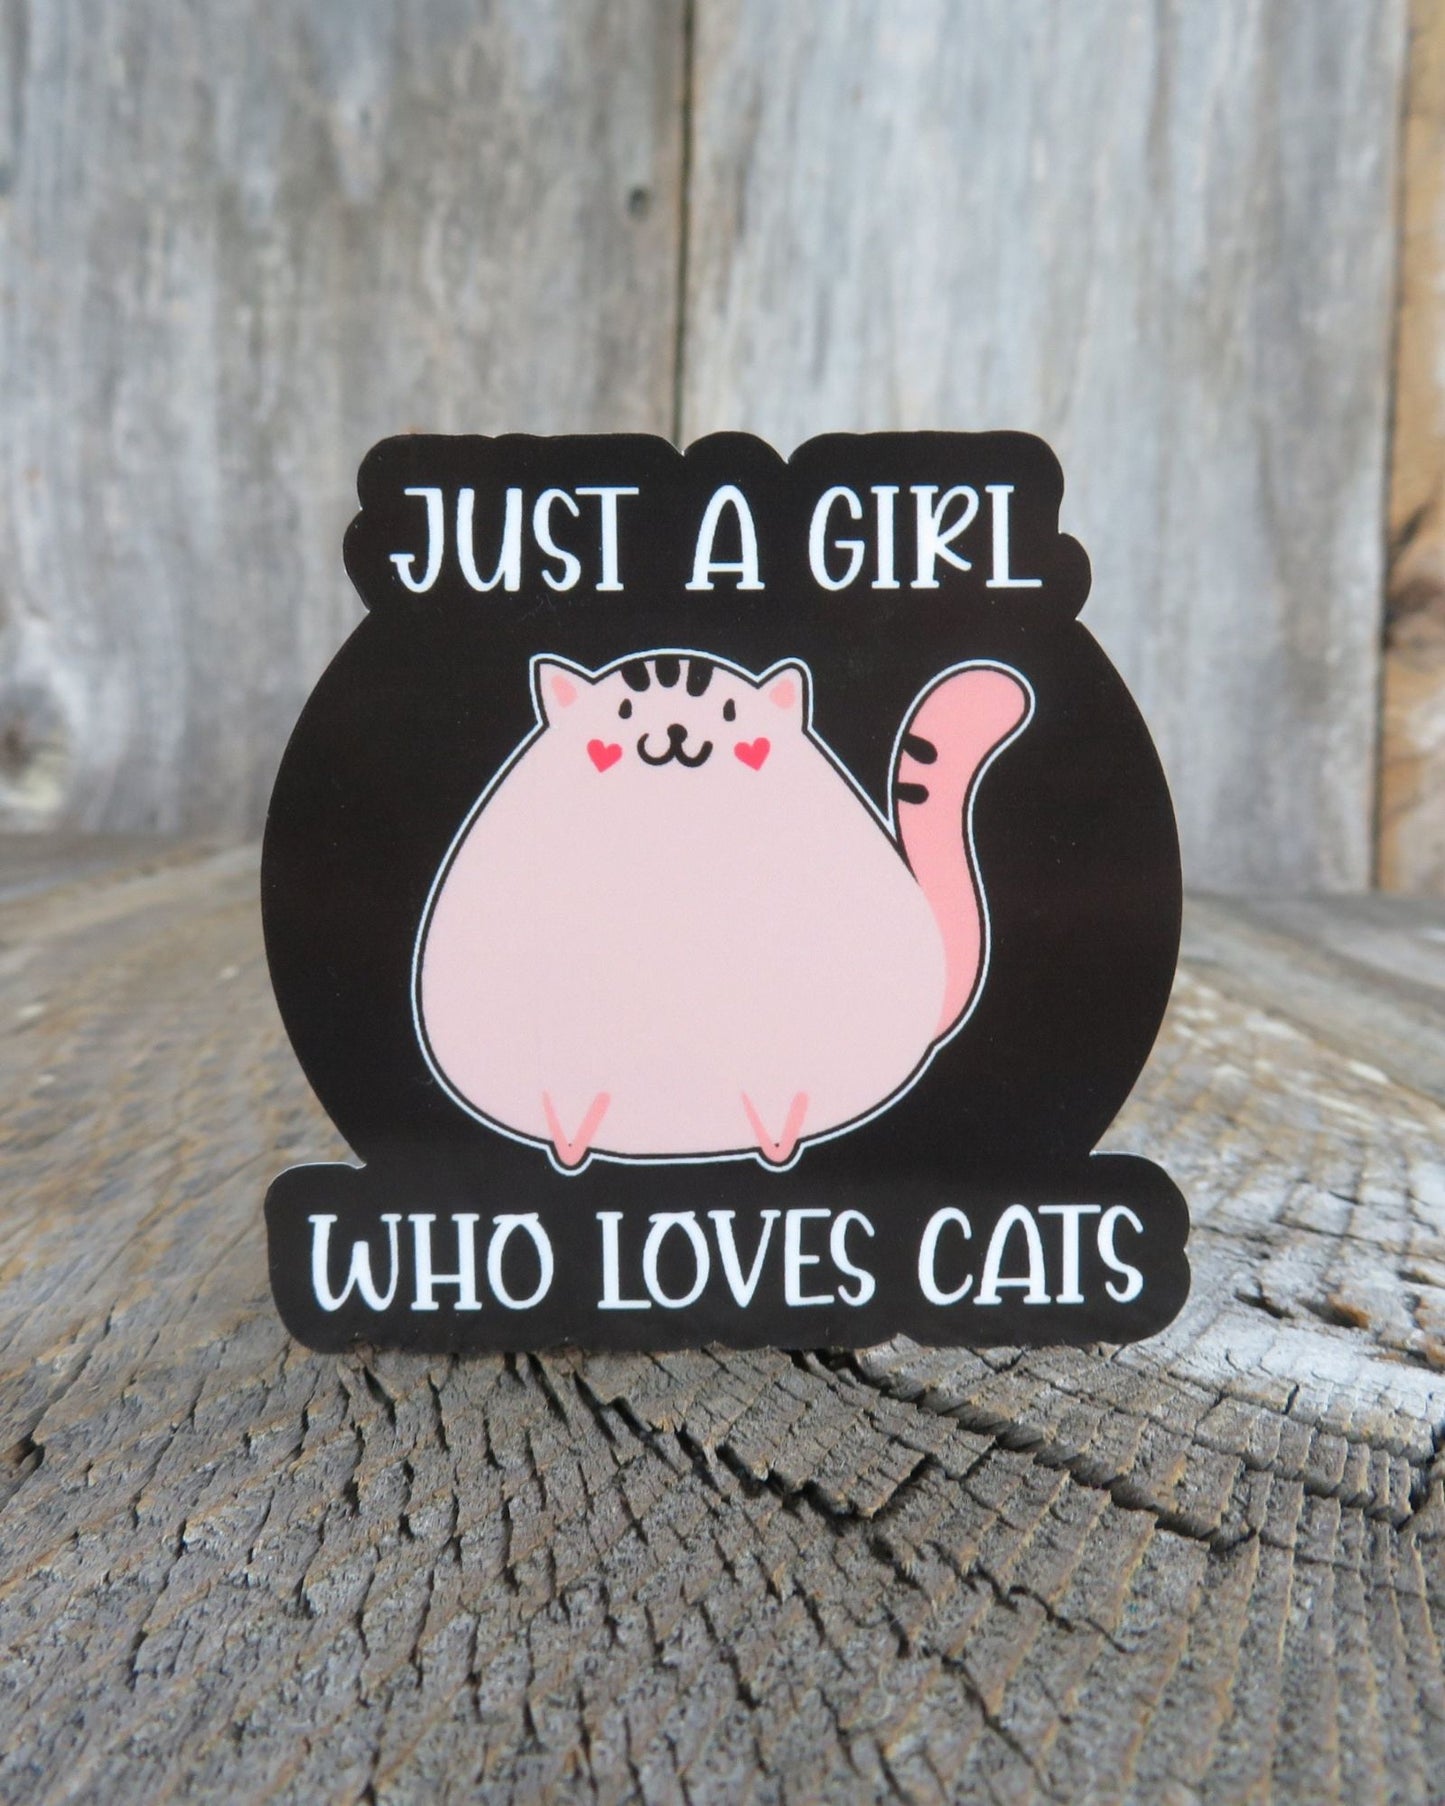 Just A Girl Who Loves Cats Sticker Funny Pink Kitten Full Color Waterproof Cat Lover Humor Sticker